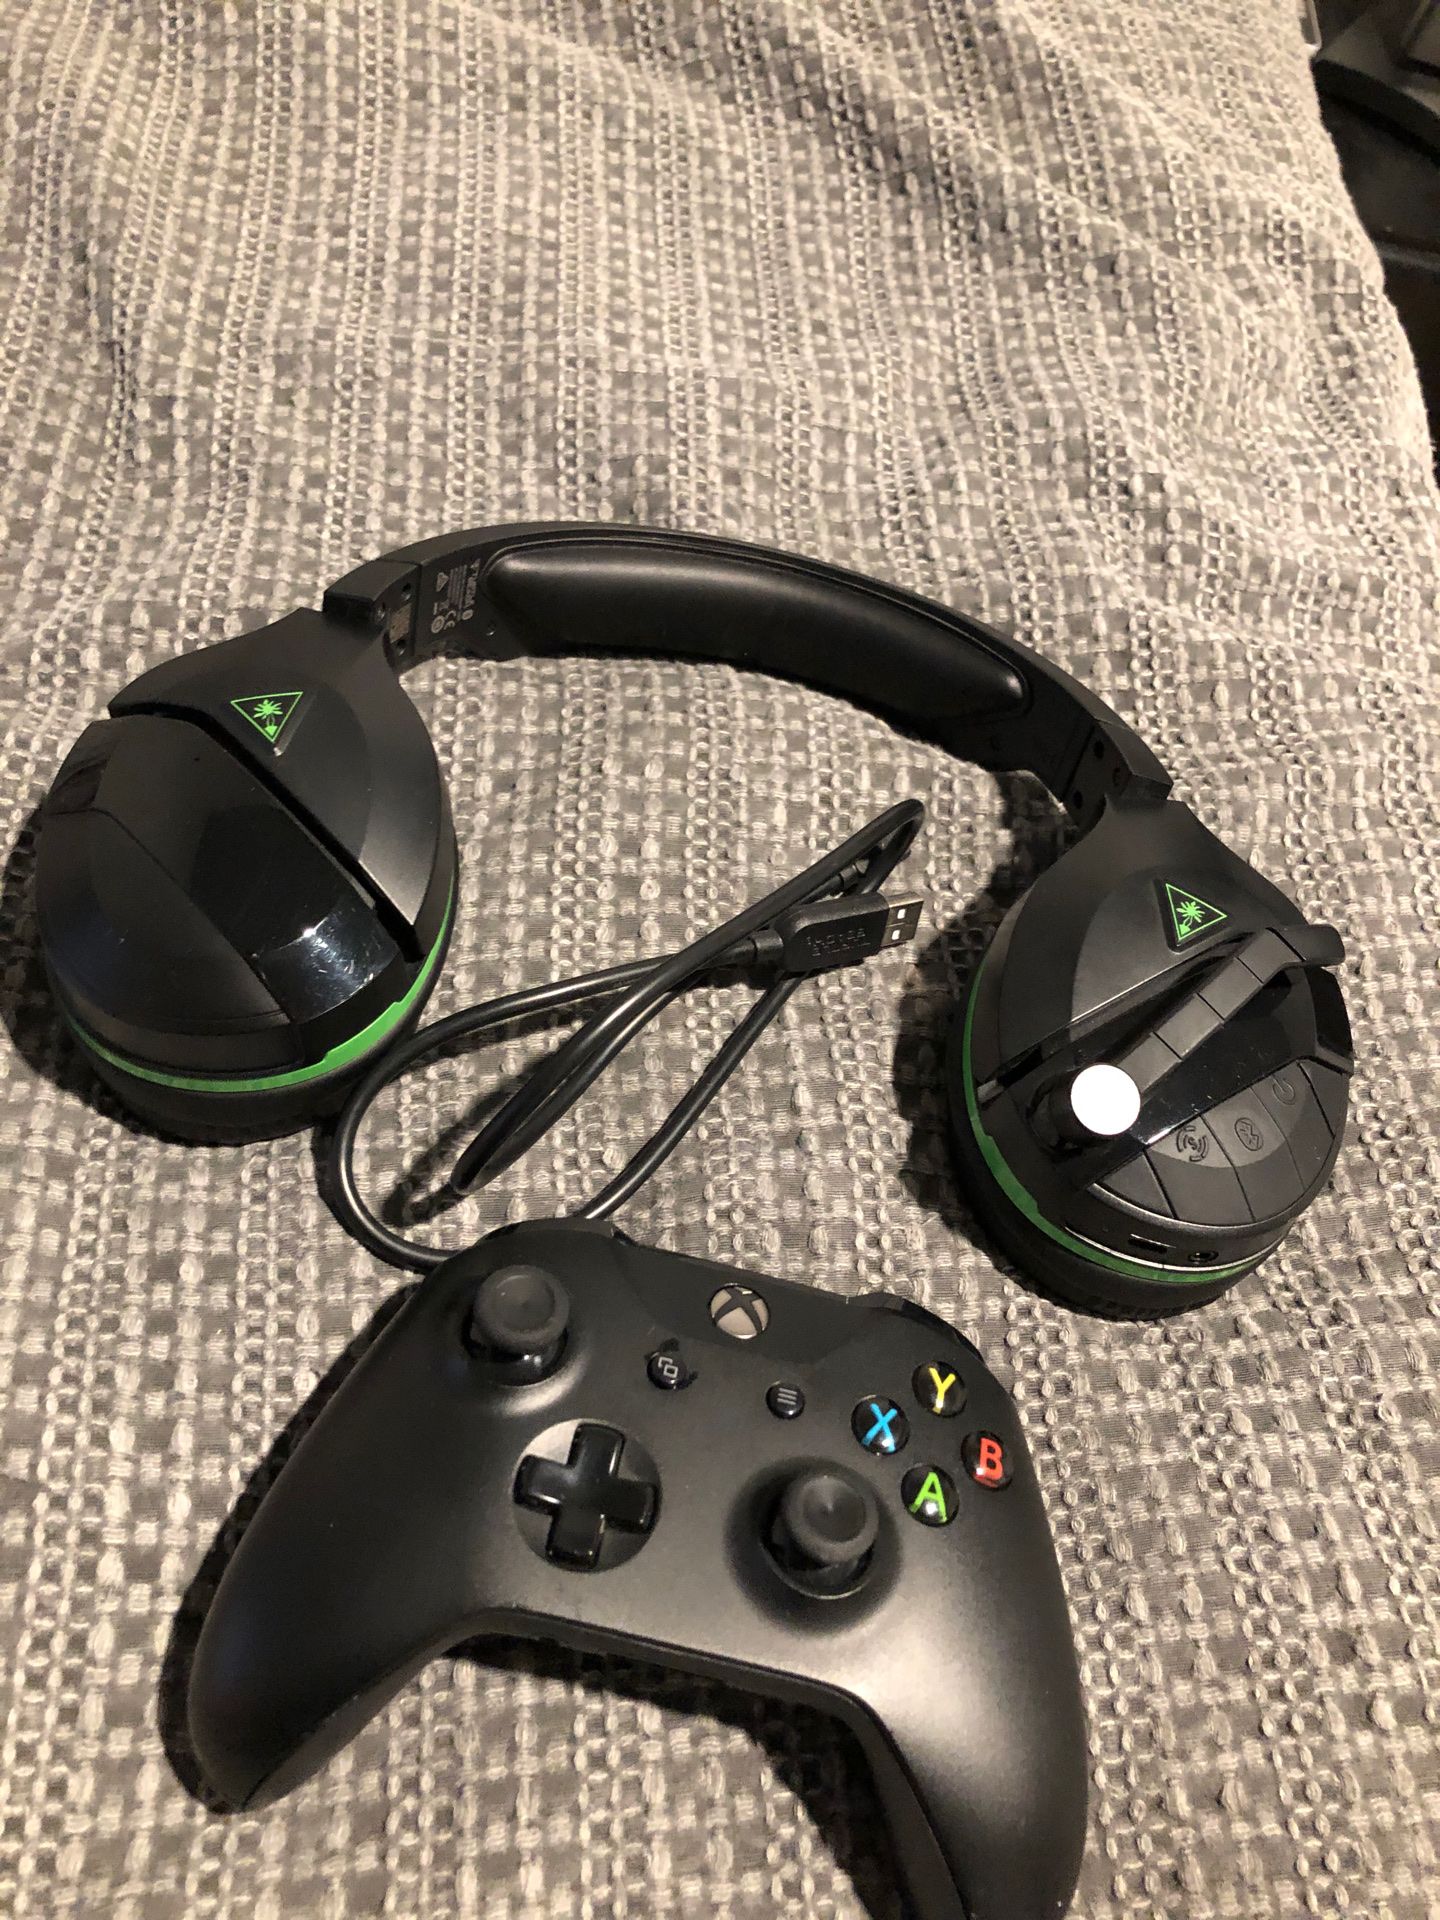 Turtle beach Stealth 700 headset & Xbox controller